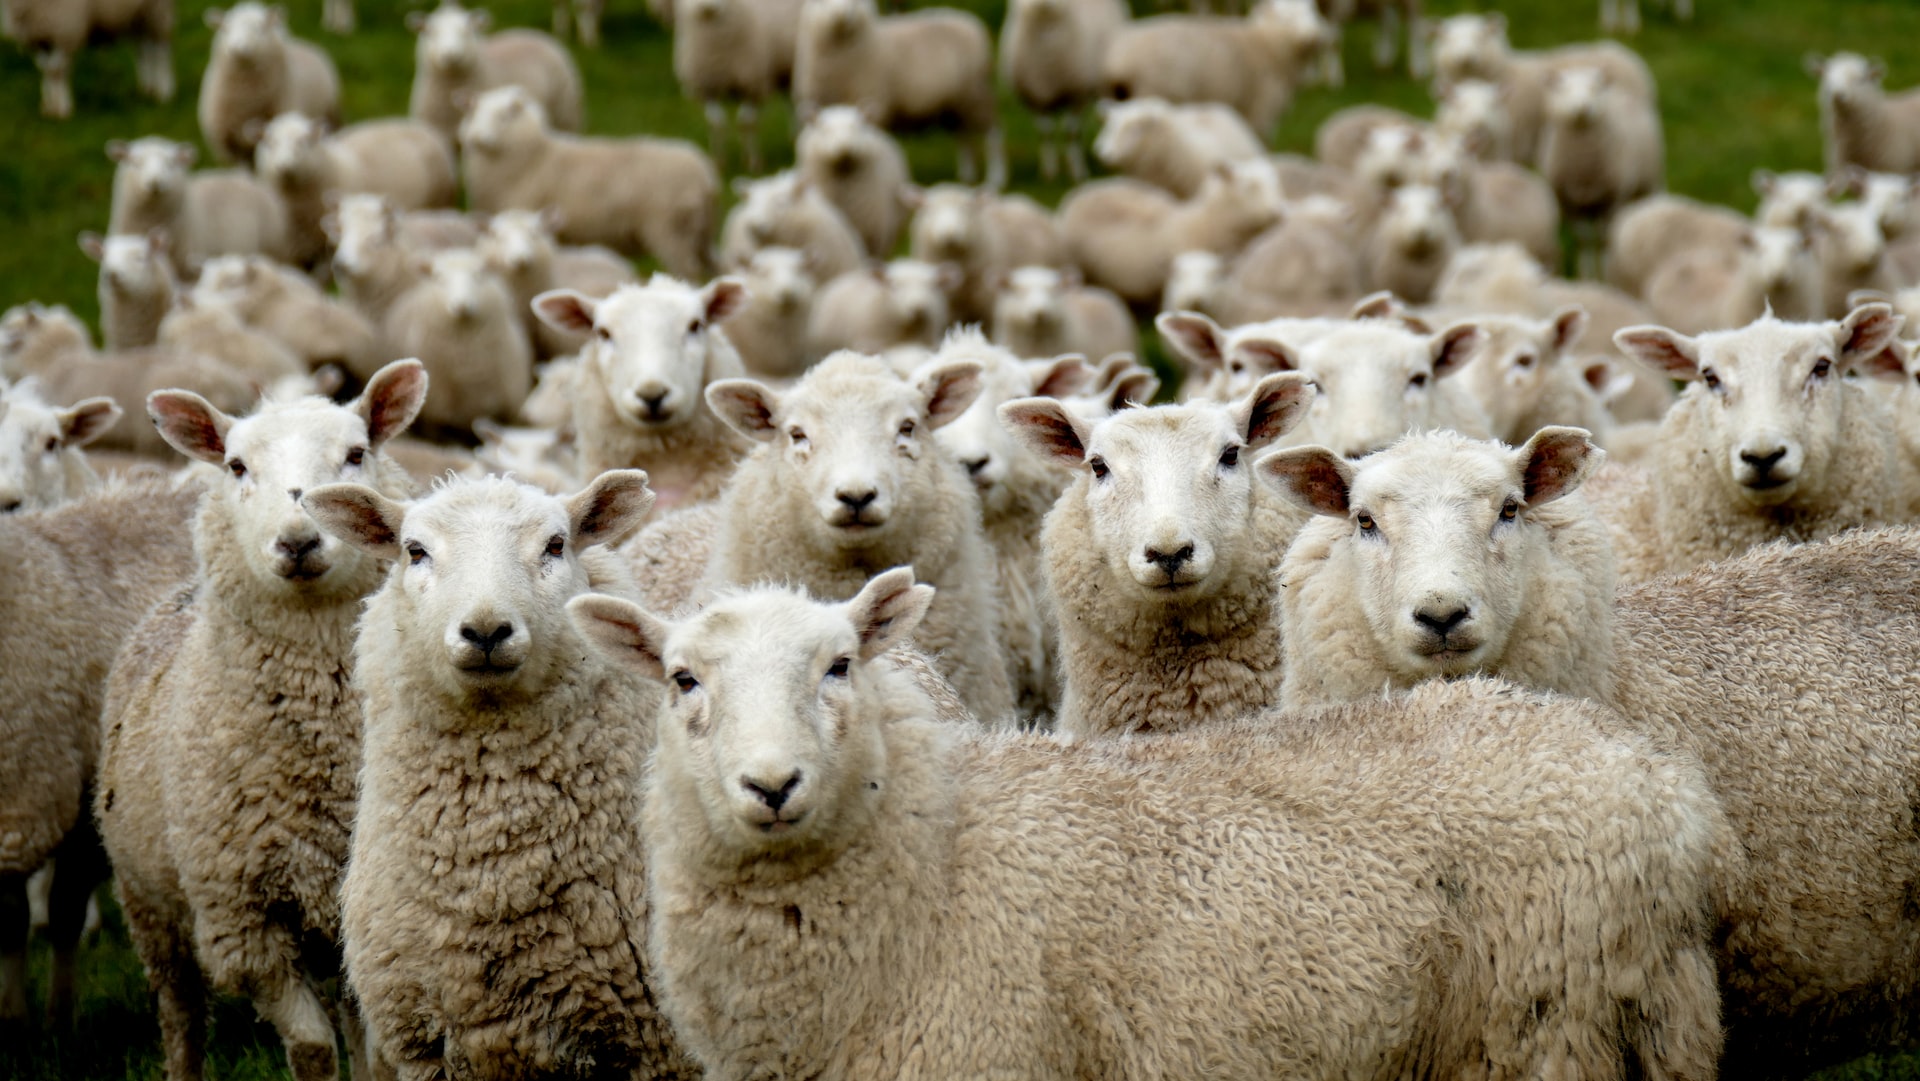 A group of sheep all looking toward the camera